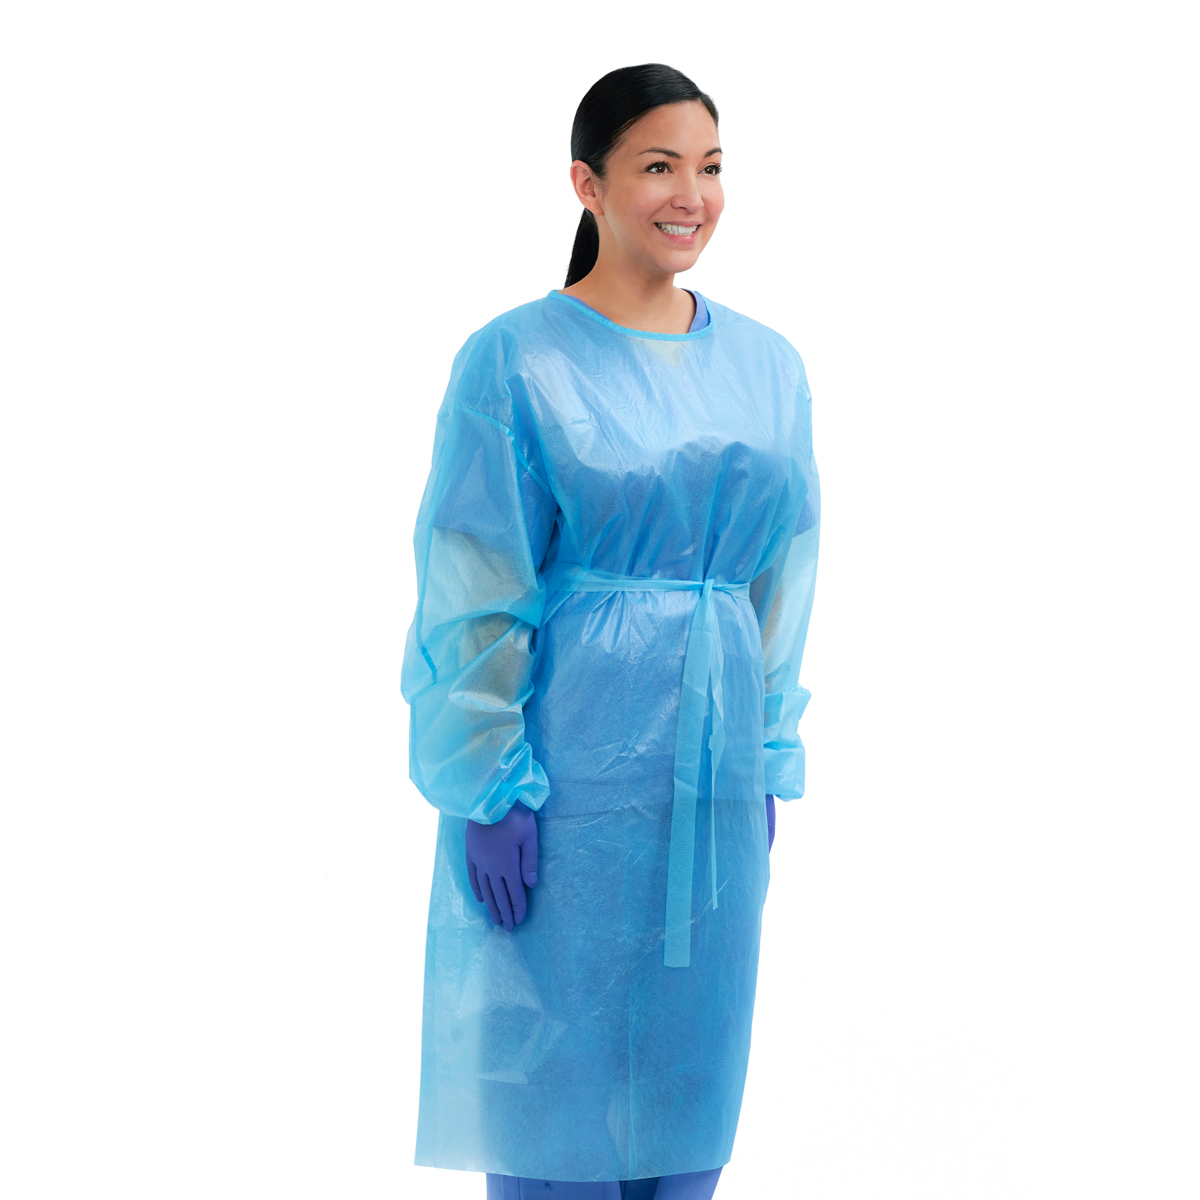 AAMI Level 1 Gown Image